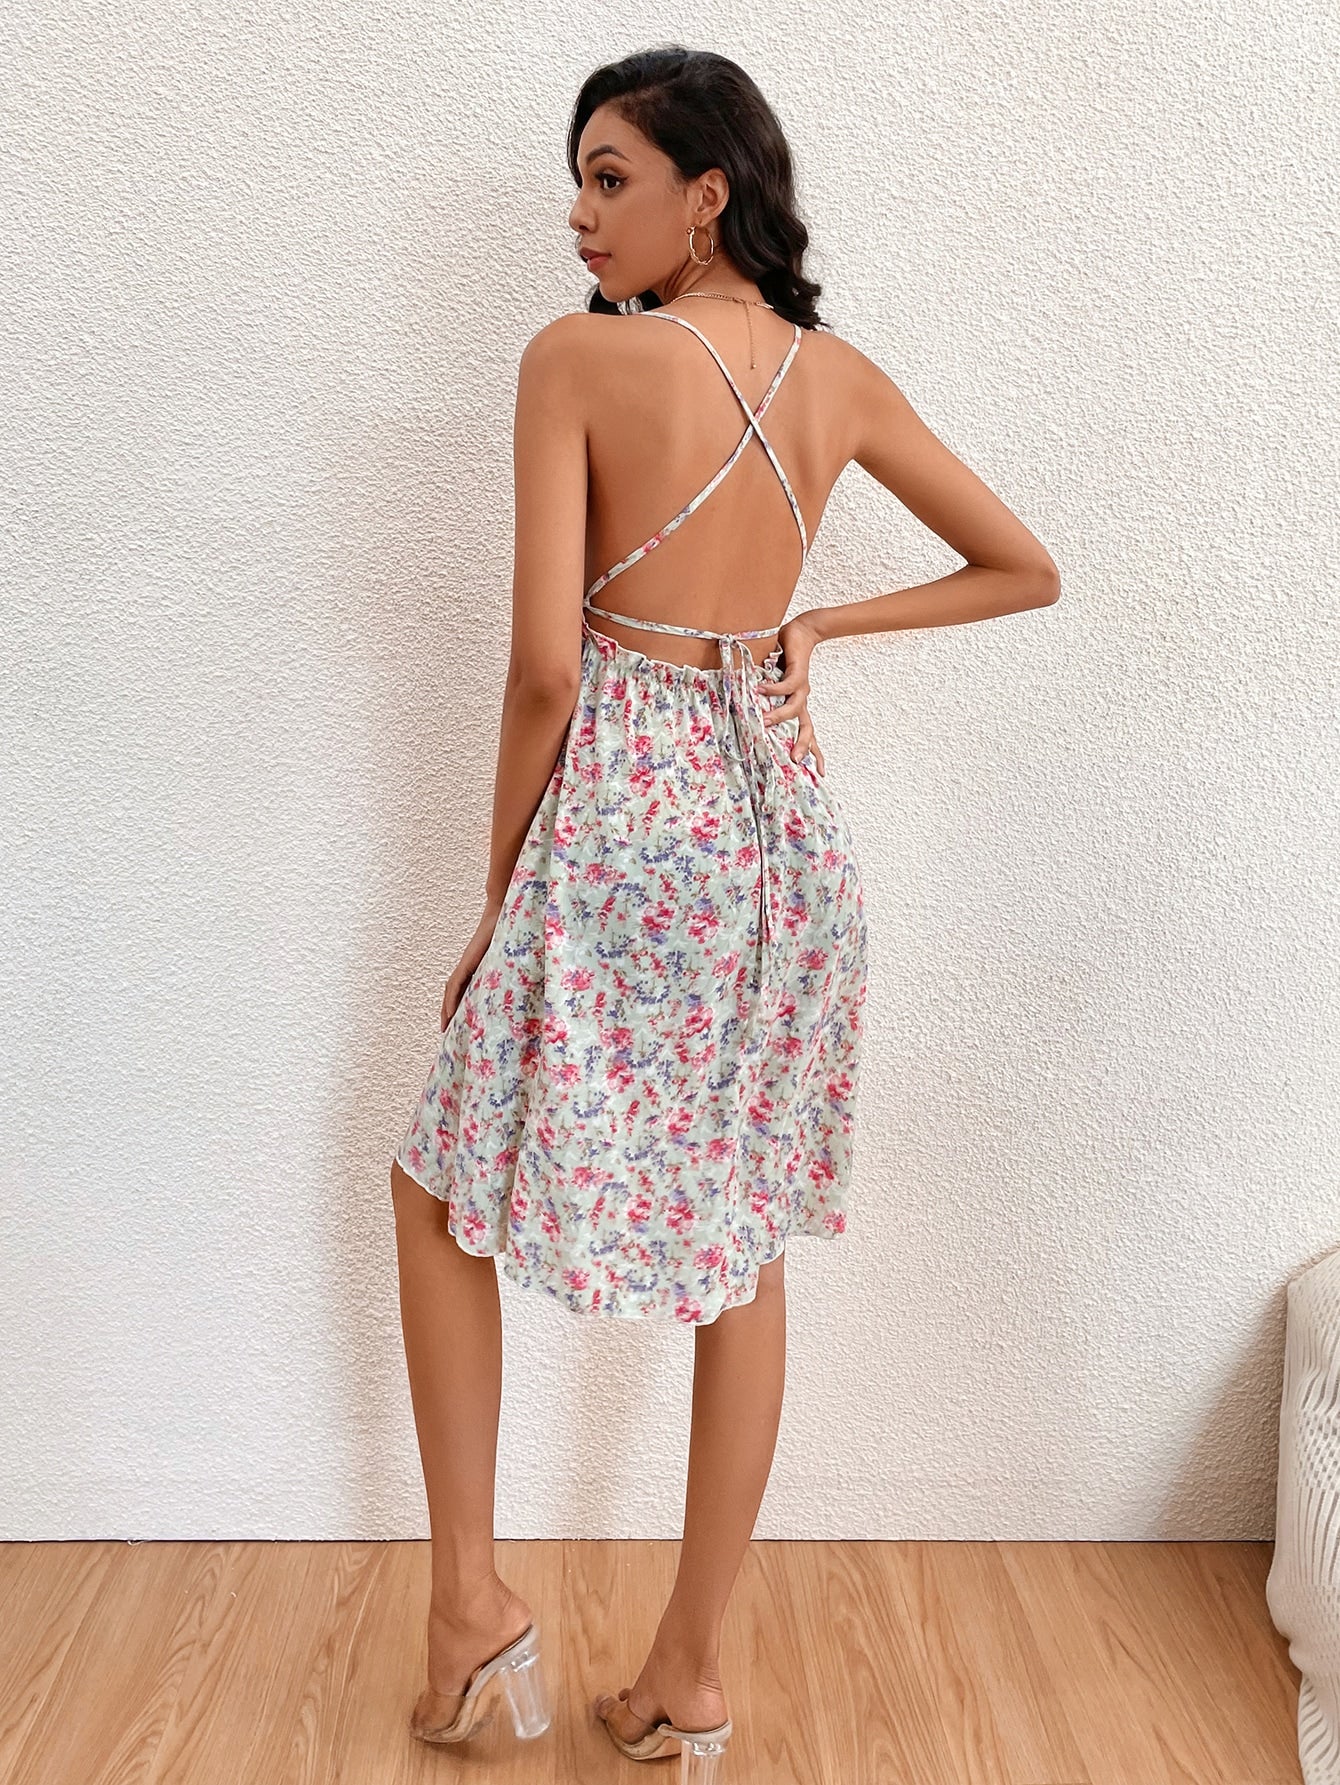 Floral Lace Up Backless Cami Dress